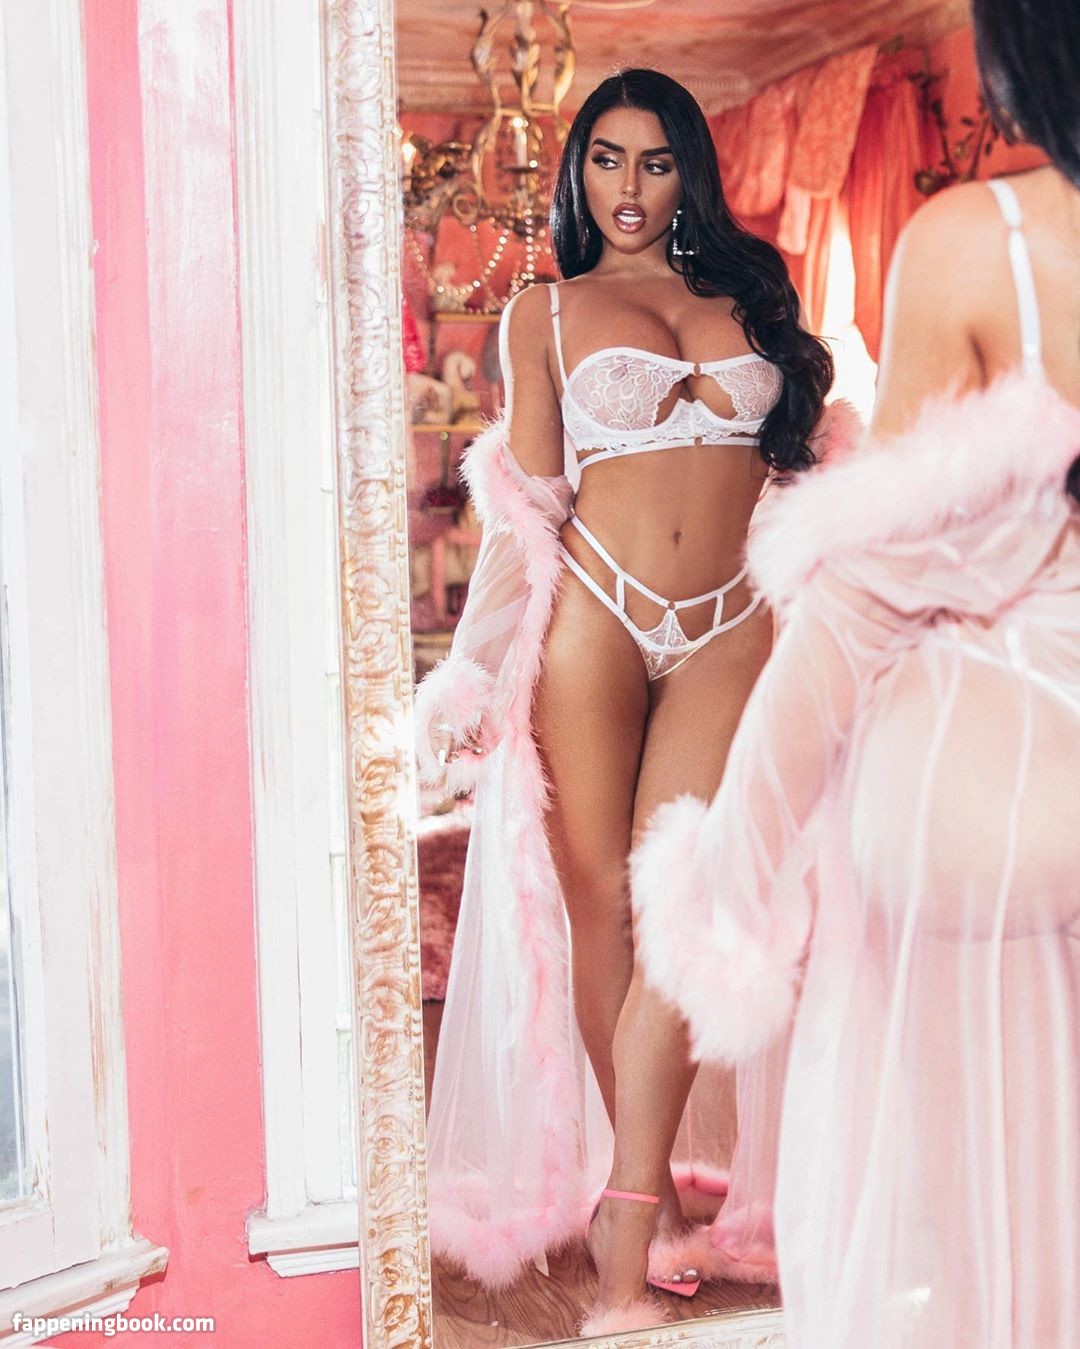 Abigail Ratchford Nude